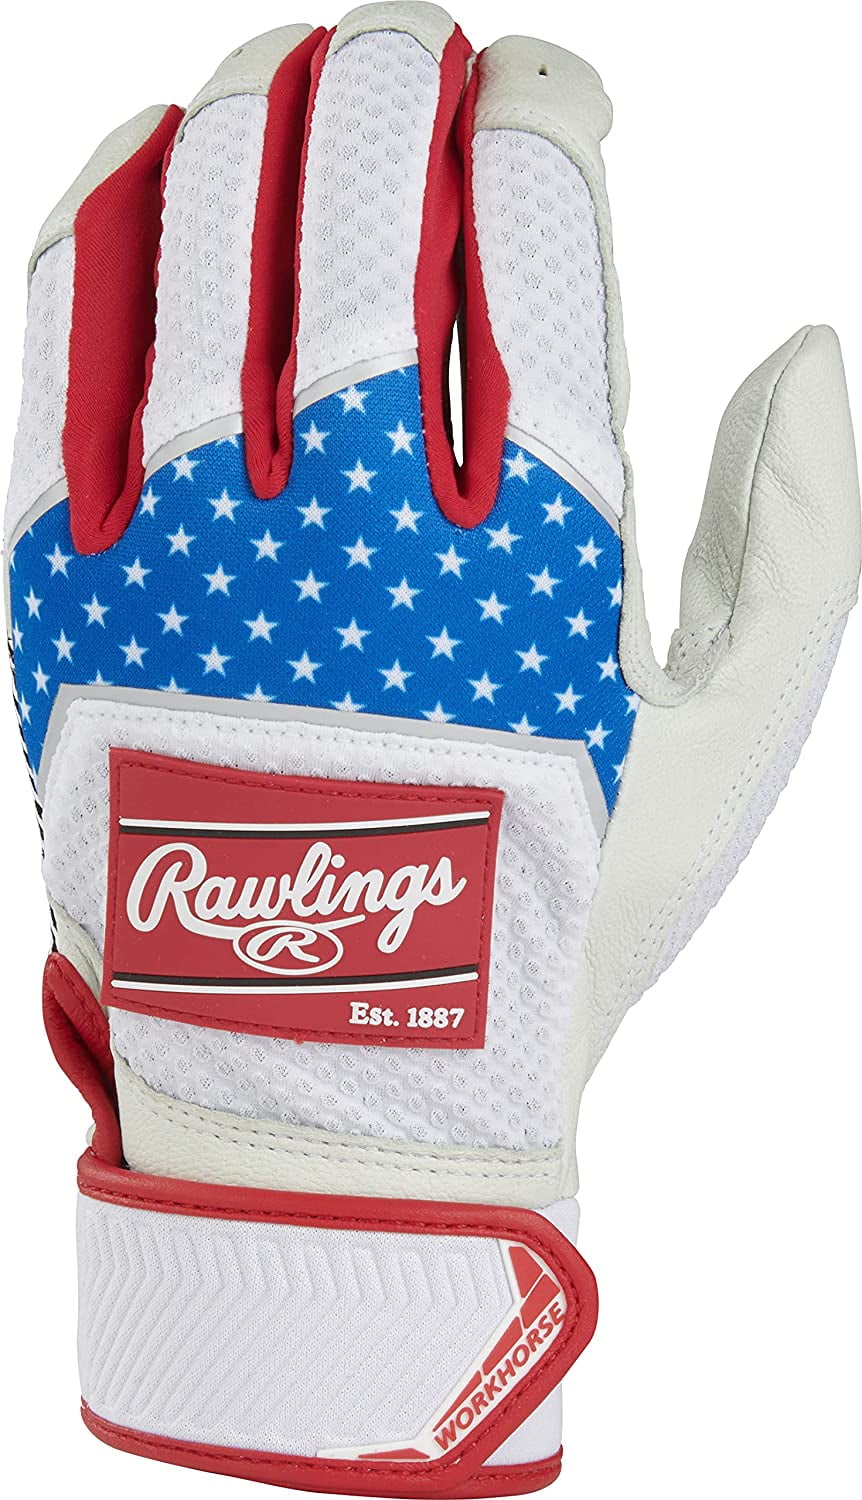 New Rawlings Youth Batting Gloves Pair Large Black 350 Series Leather Baseball 